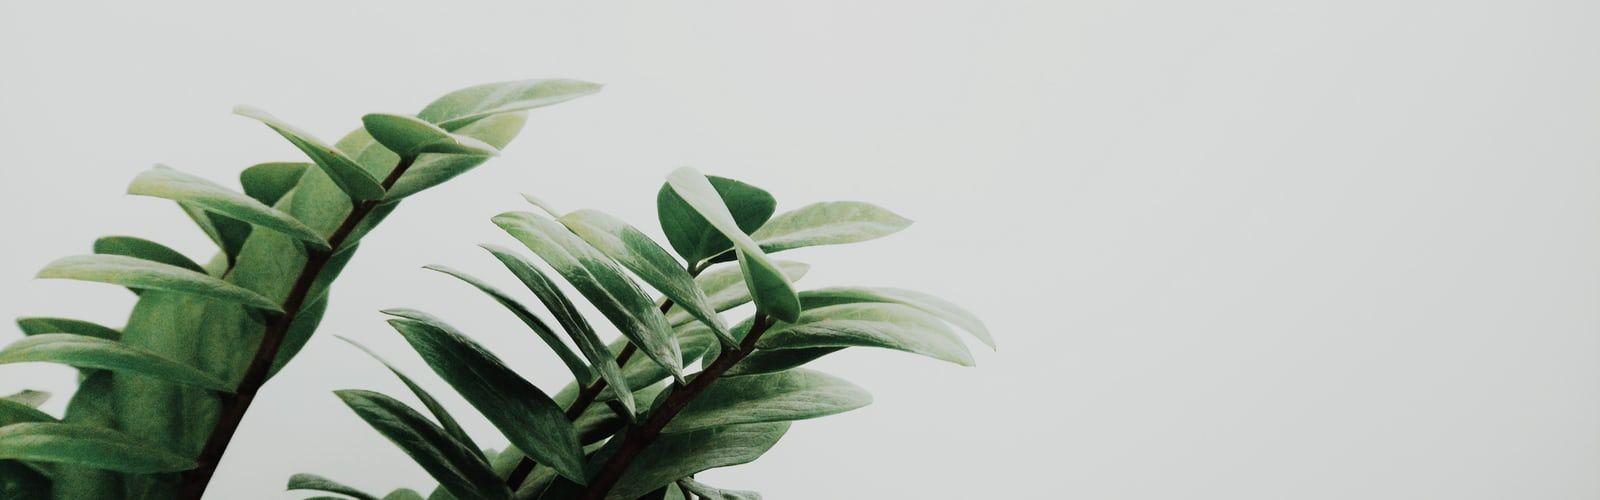 Minimal Plant Wallpapers - Top Free Minimal Plant Backgrounds